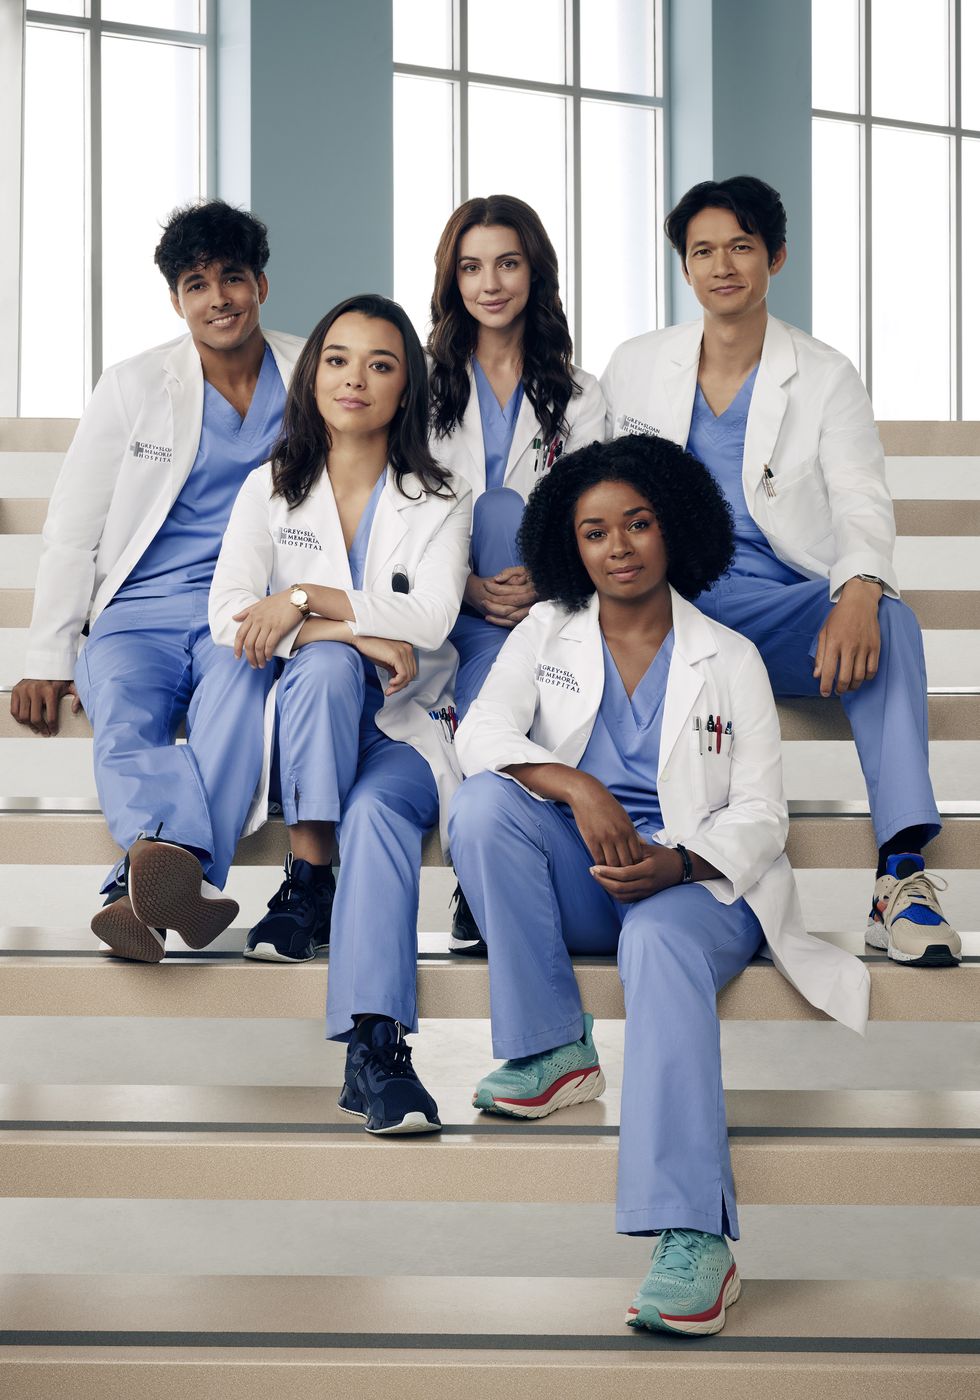 The 5 New Interns of 'Grey's Anatomy' Reveal All the Details About Their  Debuts in a Behind-the-Scenes Interview